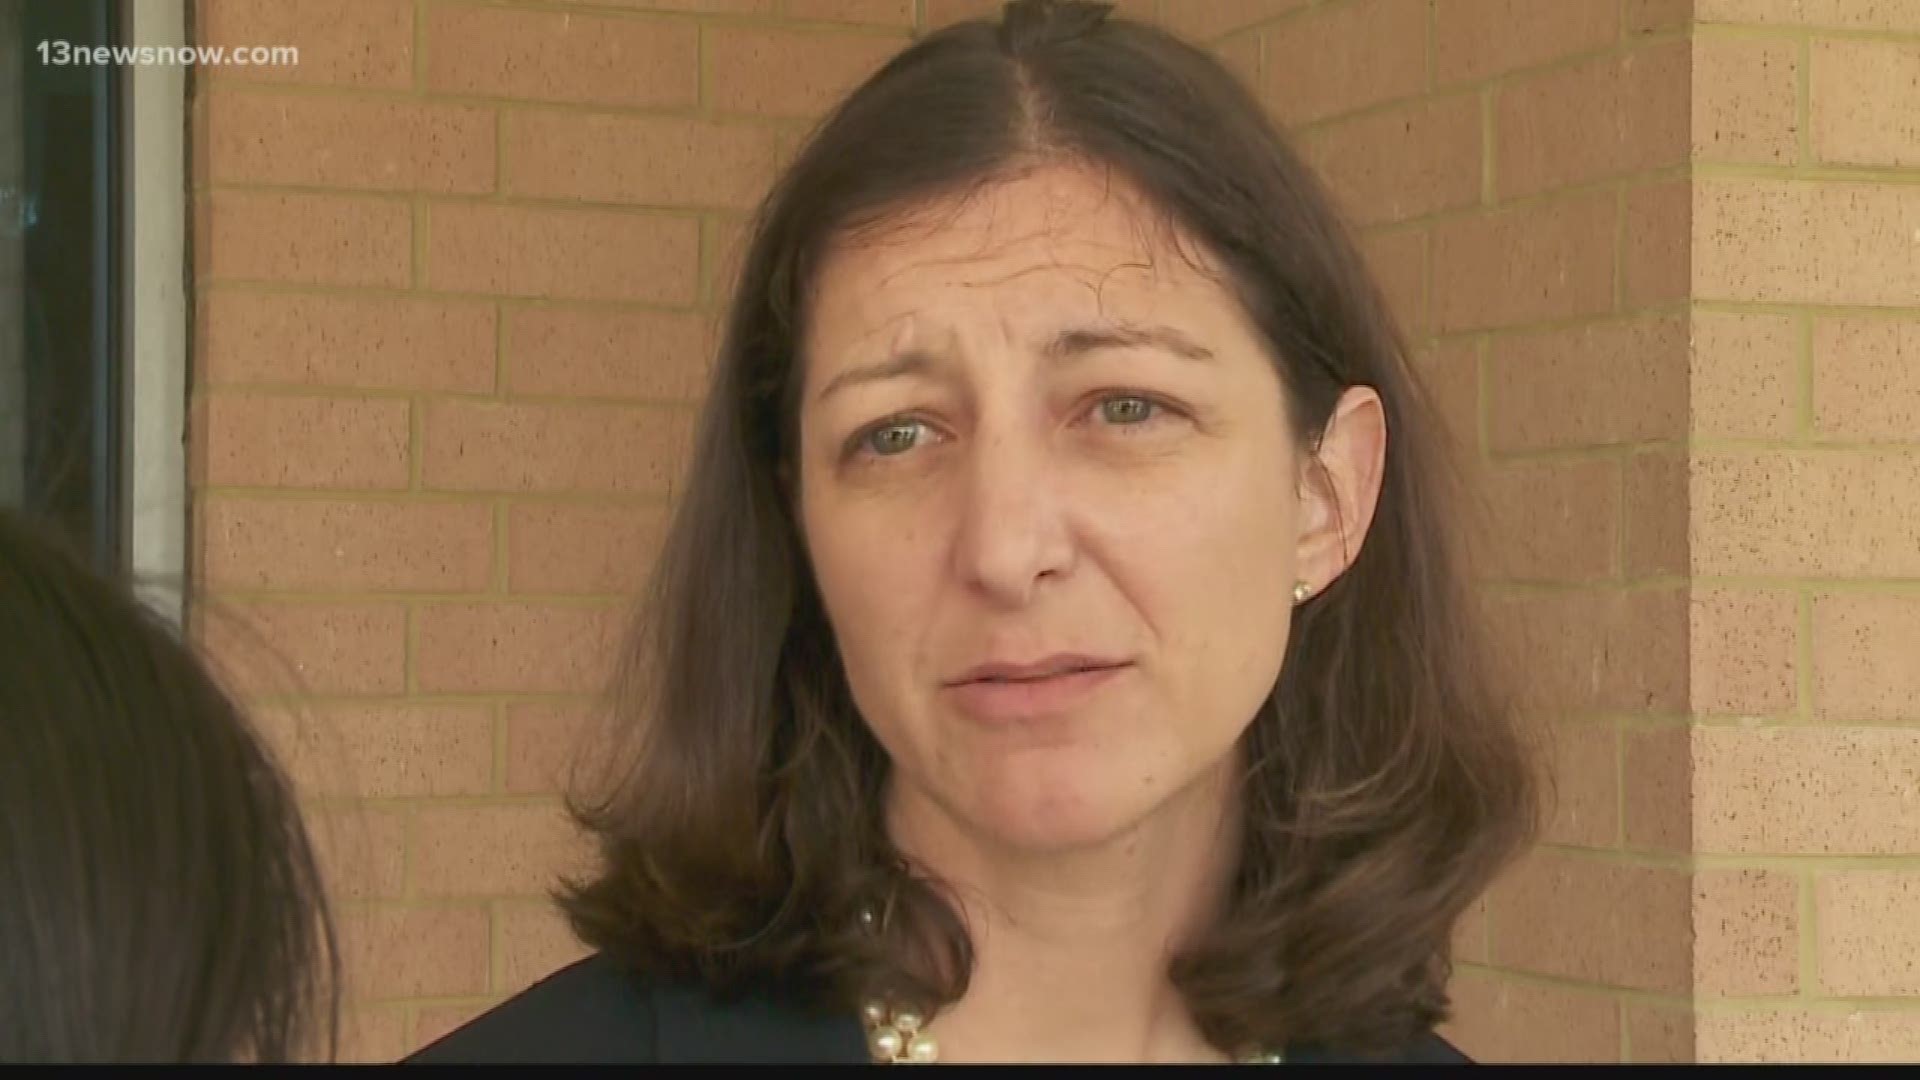 Elaine Luria weighed in about the signature questions, which have grabbed headlines. Luria told us she's trying to focus on Second District issues.